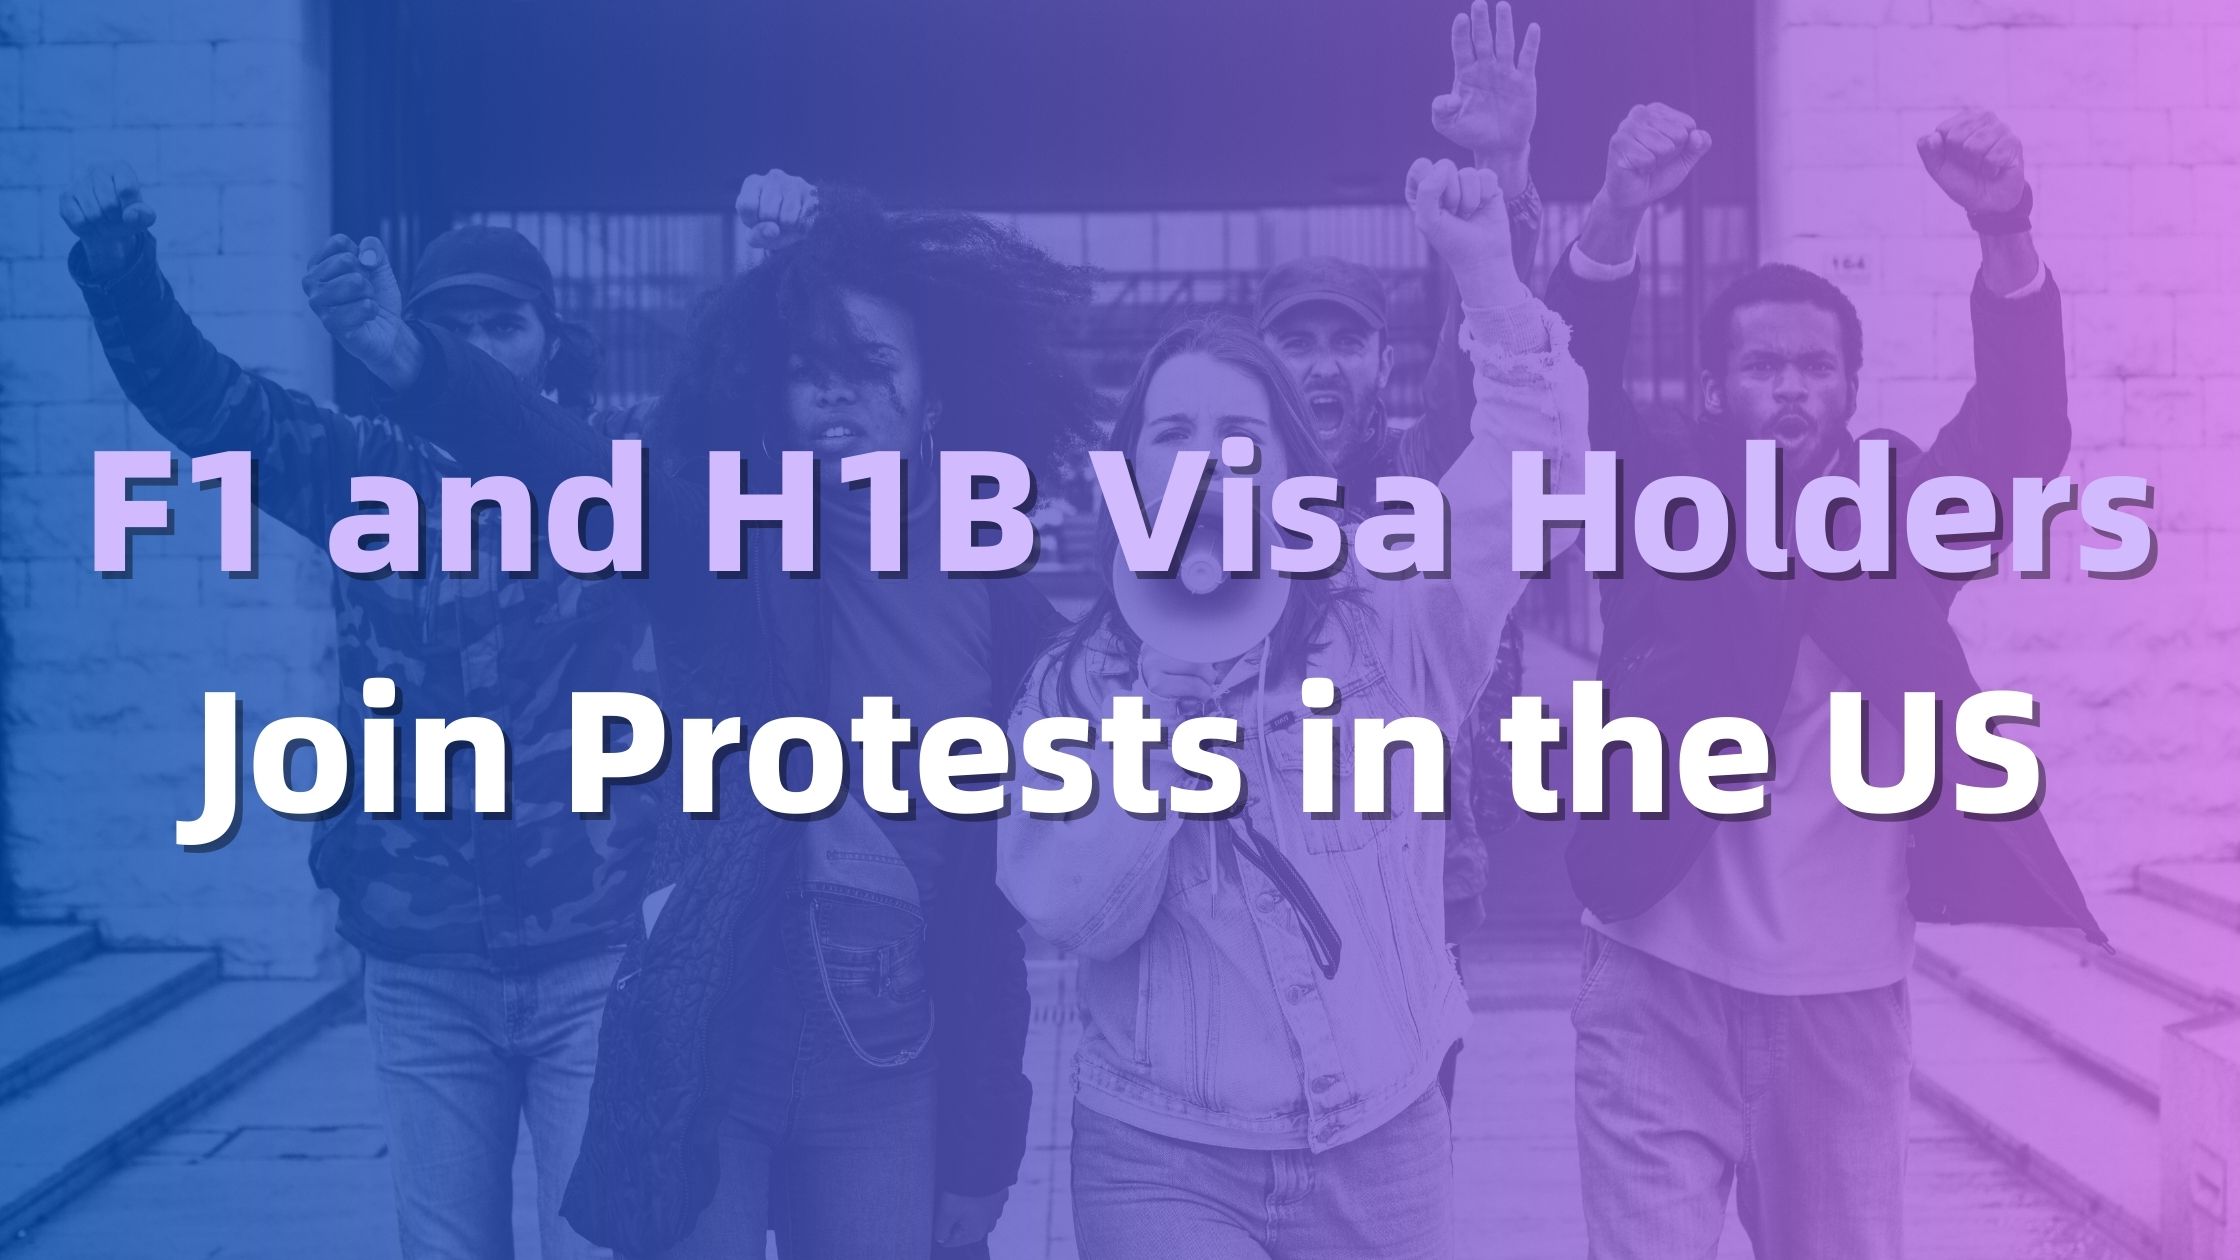 F1 and H1B Visa Holders Join Protests in the US